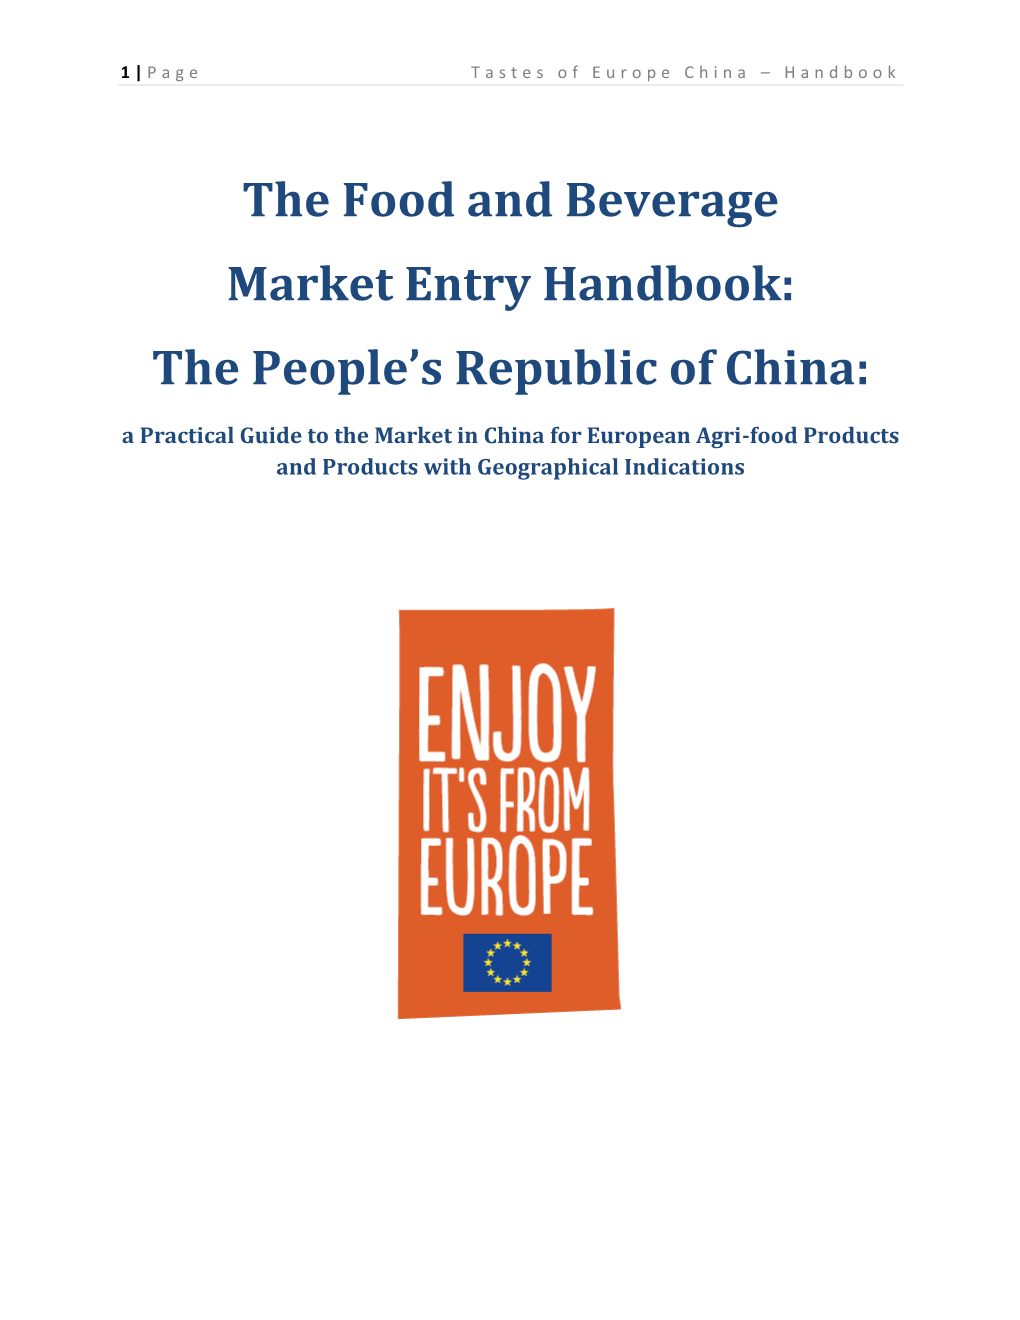 The Food and Beverage Market Entry Handbook